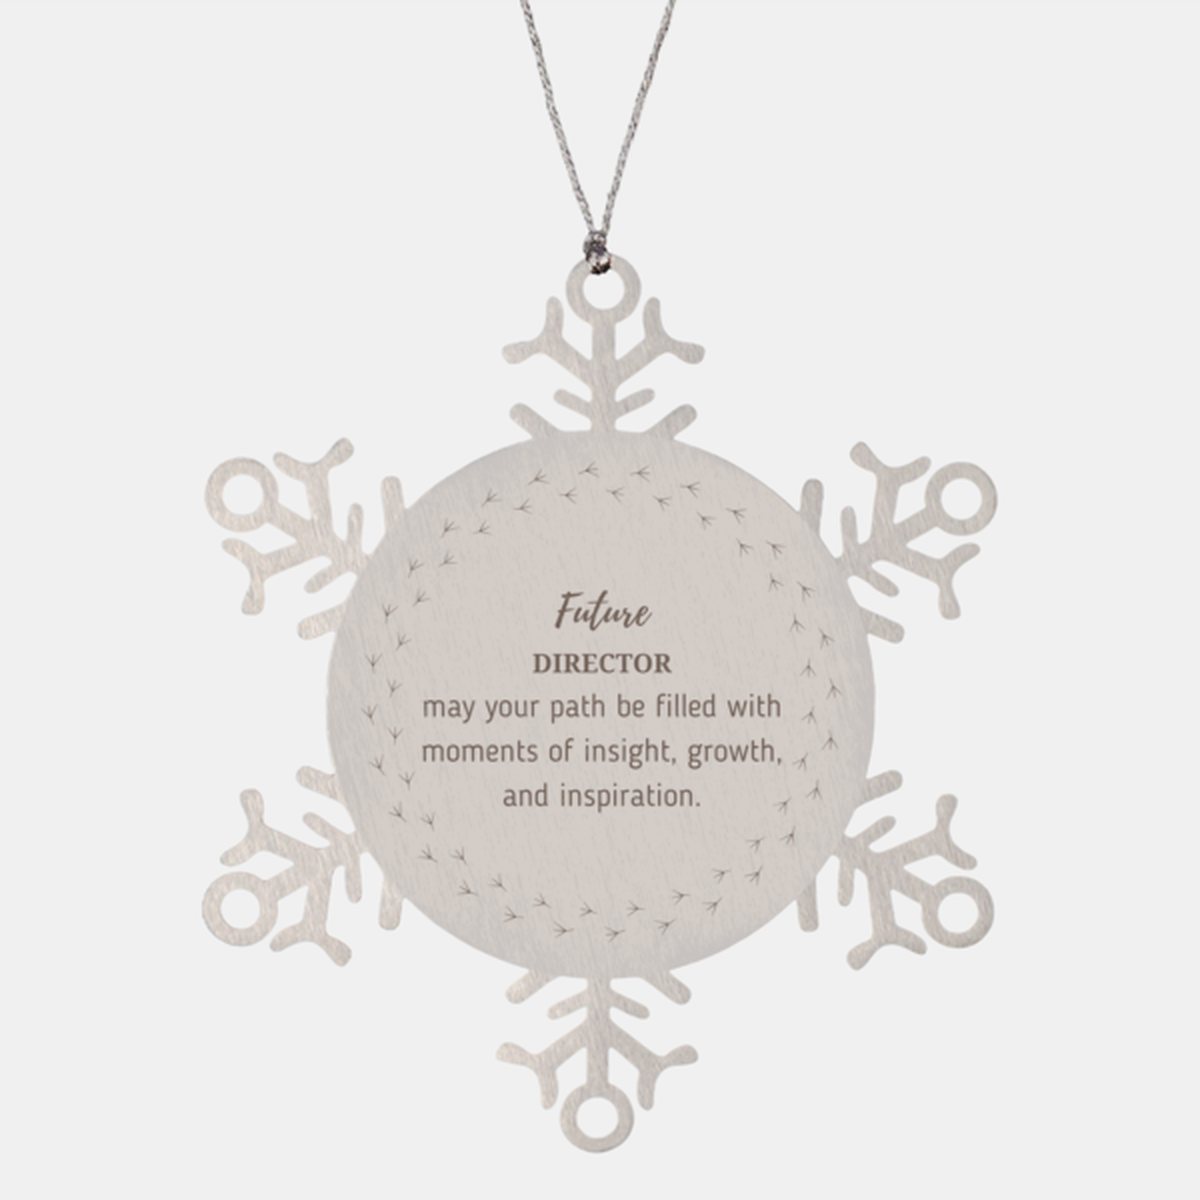 Future Director Gifts, May your path be filled with moments of insight, Graduation Gifts for New Director, Christmas Unique Snowflake Ornament For Men, Women, Friends